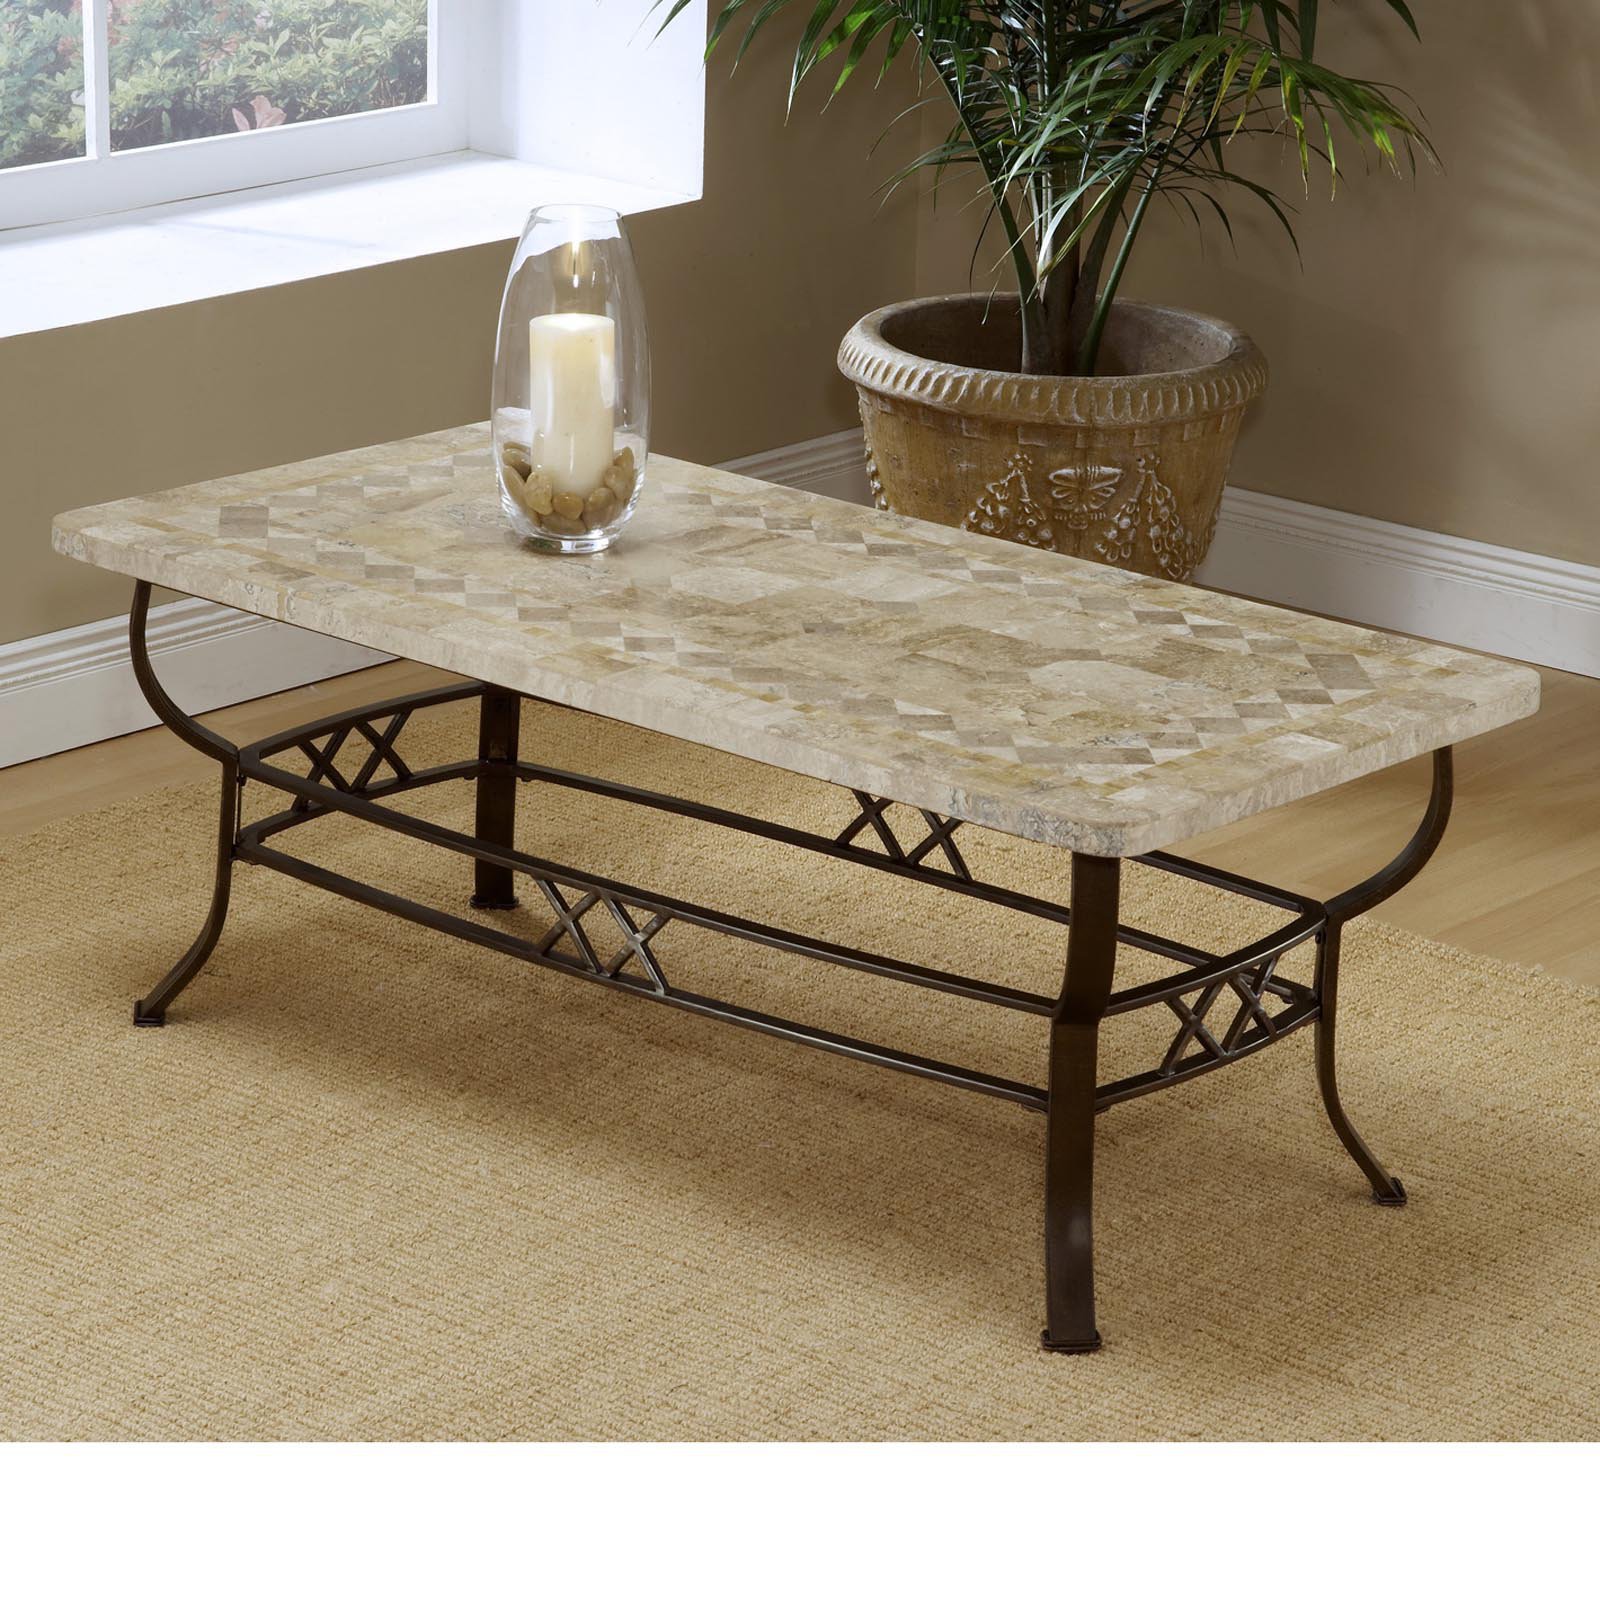 Stone Coffee Table Design Images Photos Pictures